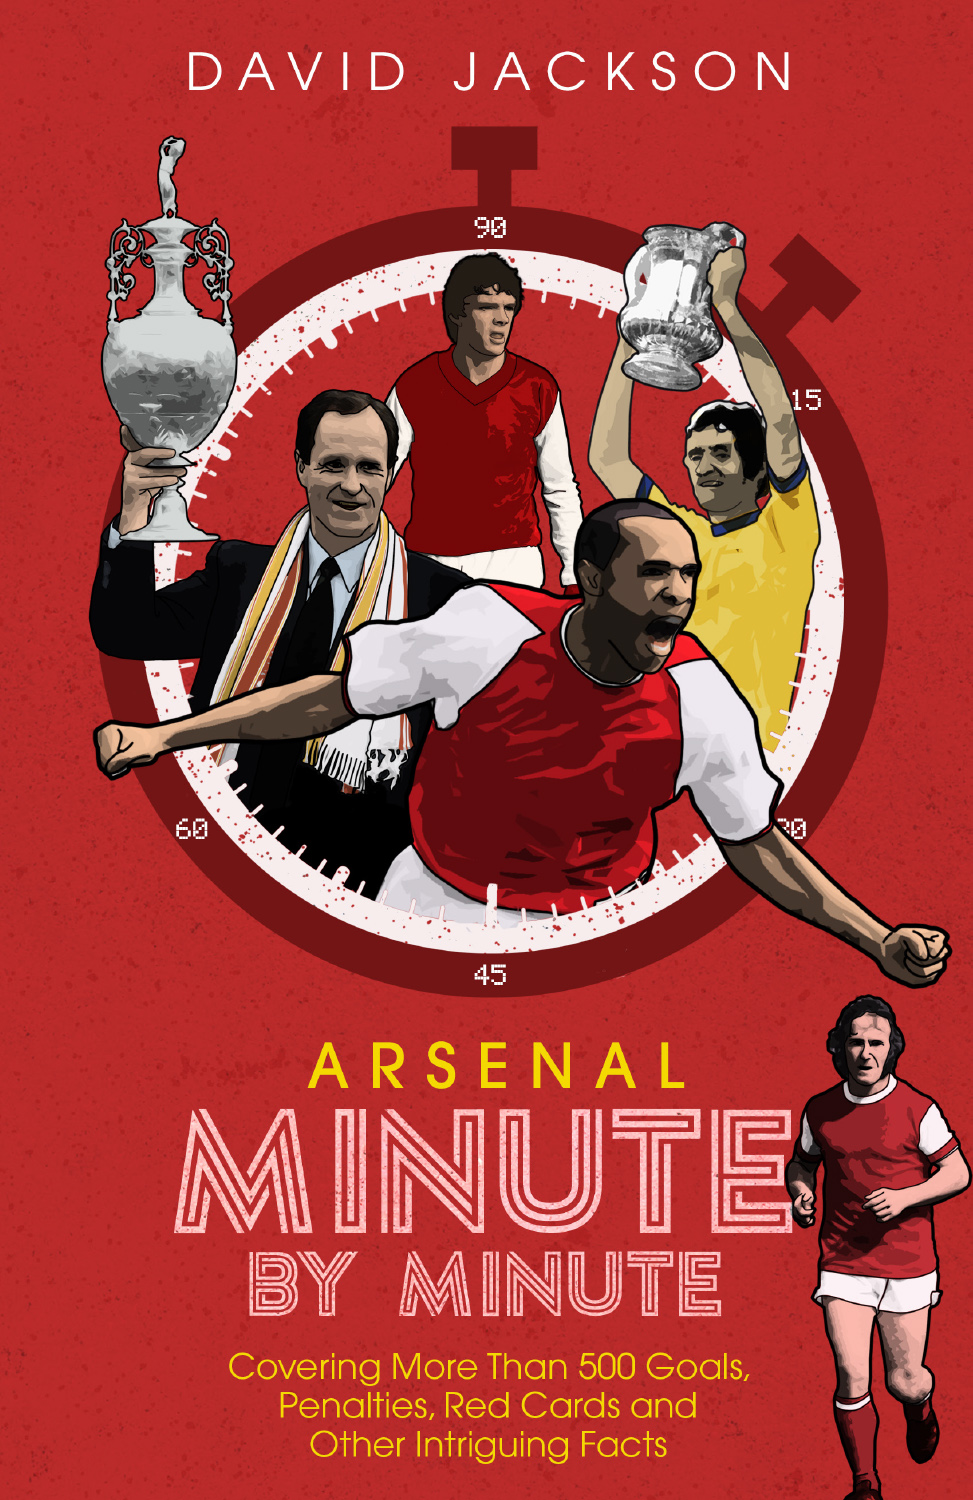 Arsenal Minute by Minute